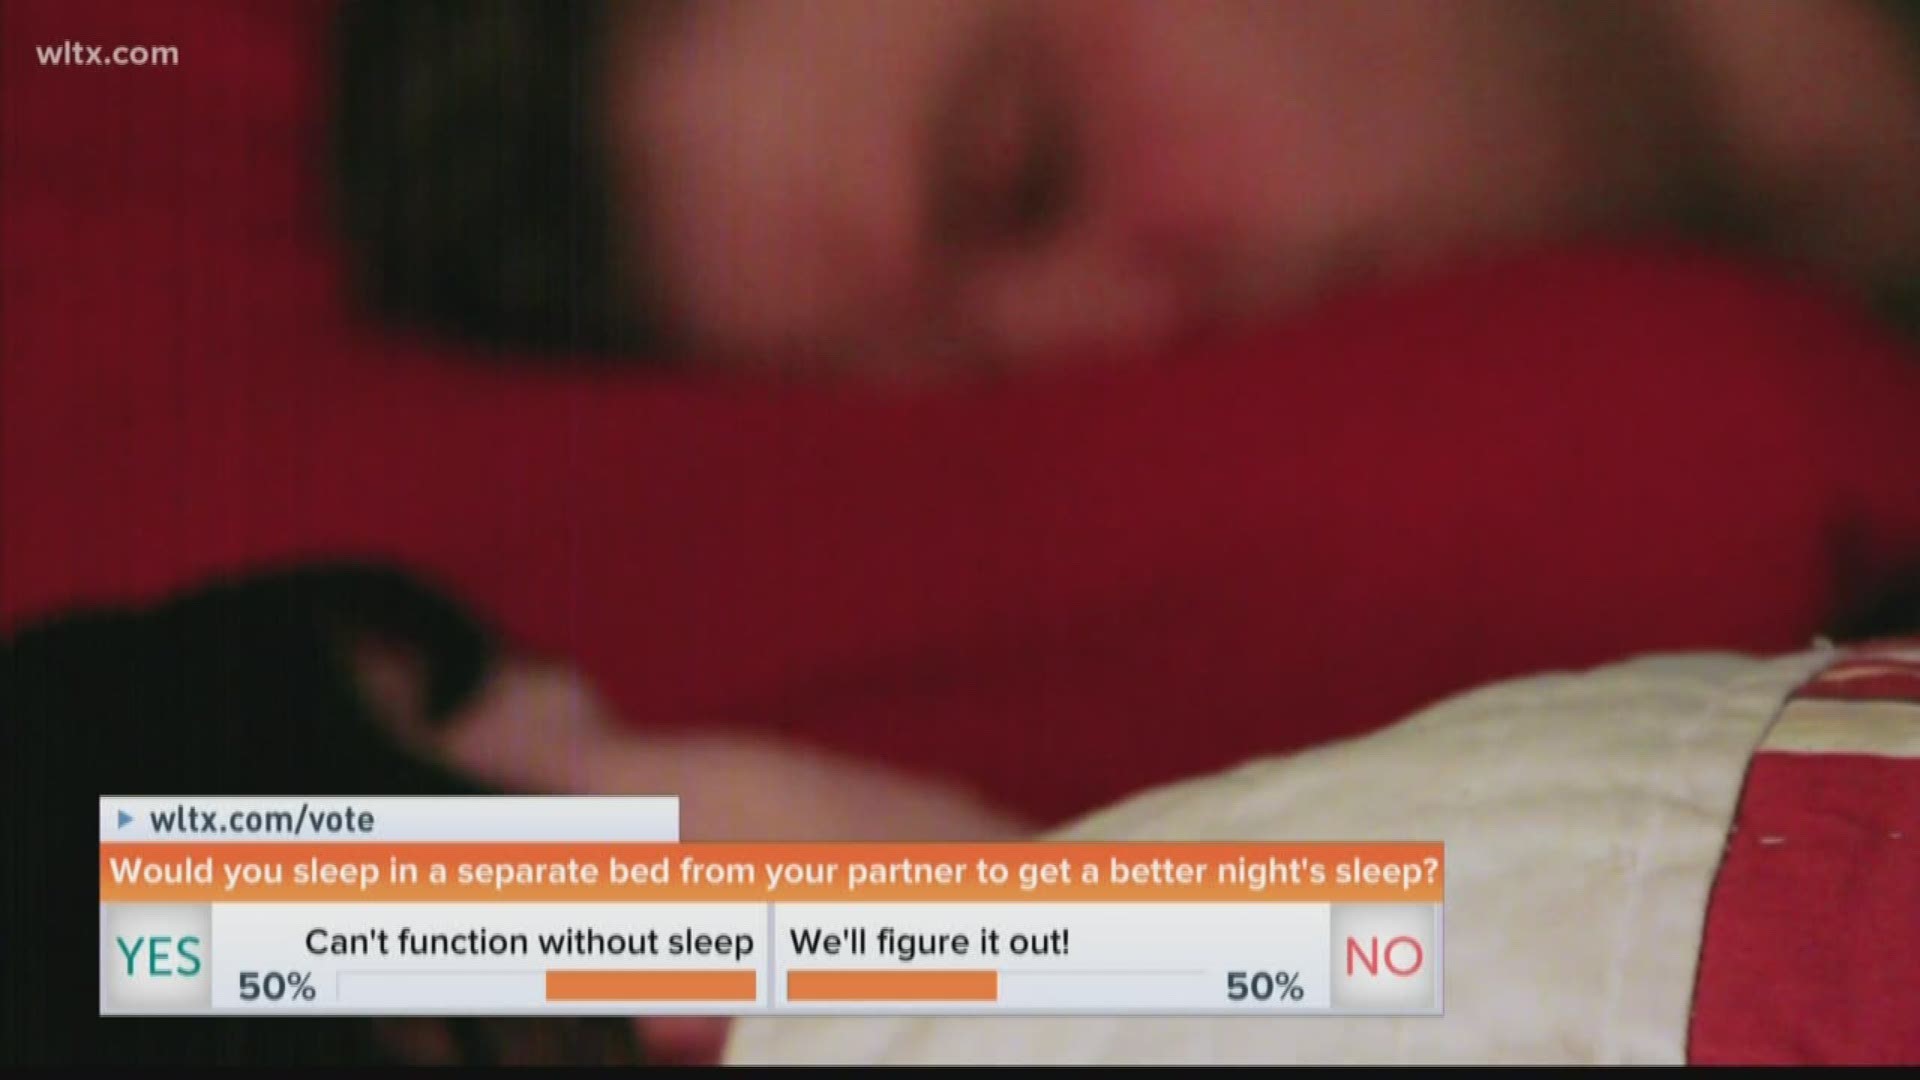 The National Sleep Foundation says 12% of married couples are not sleeping in the same bed. Would you sleep in separate bed from your partner to get a better sleep?